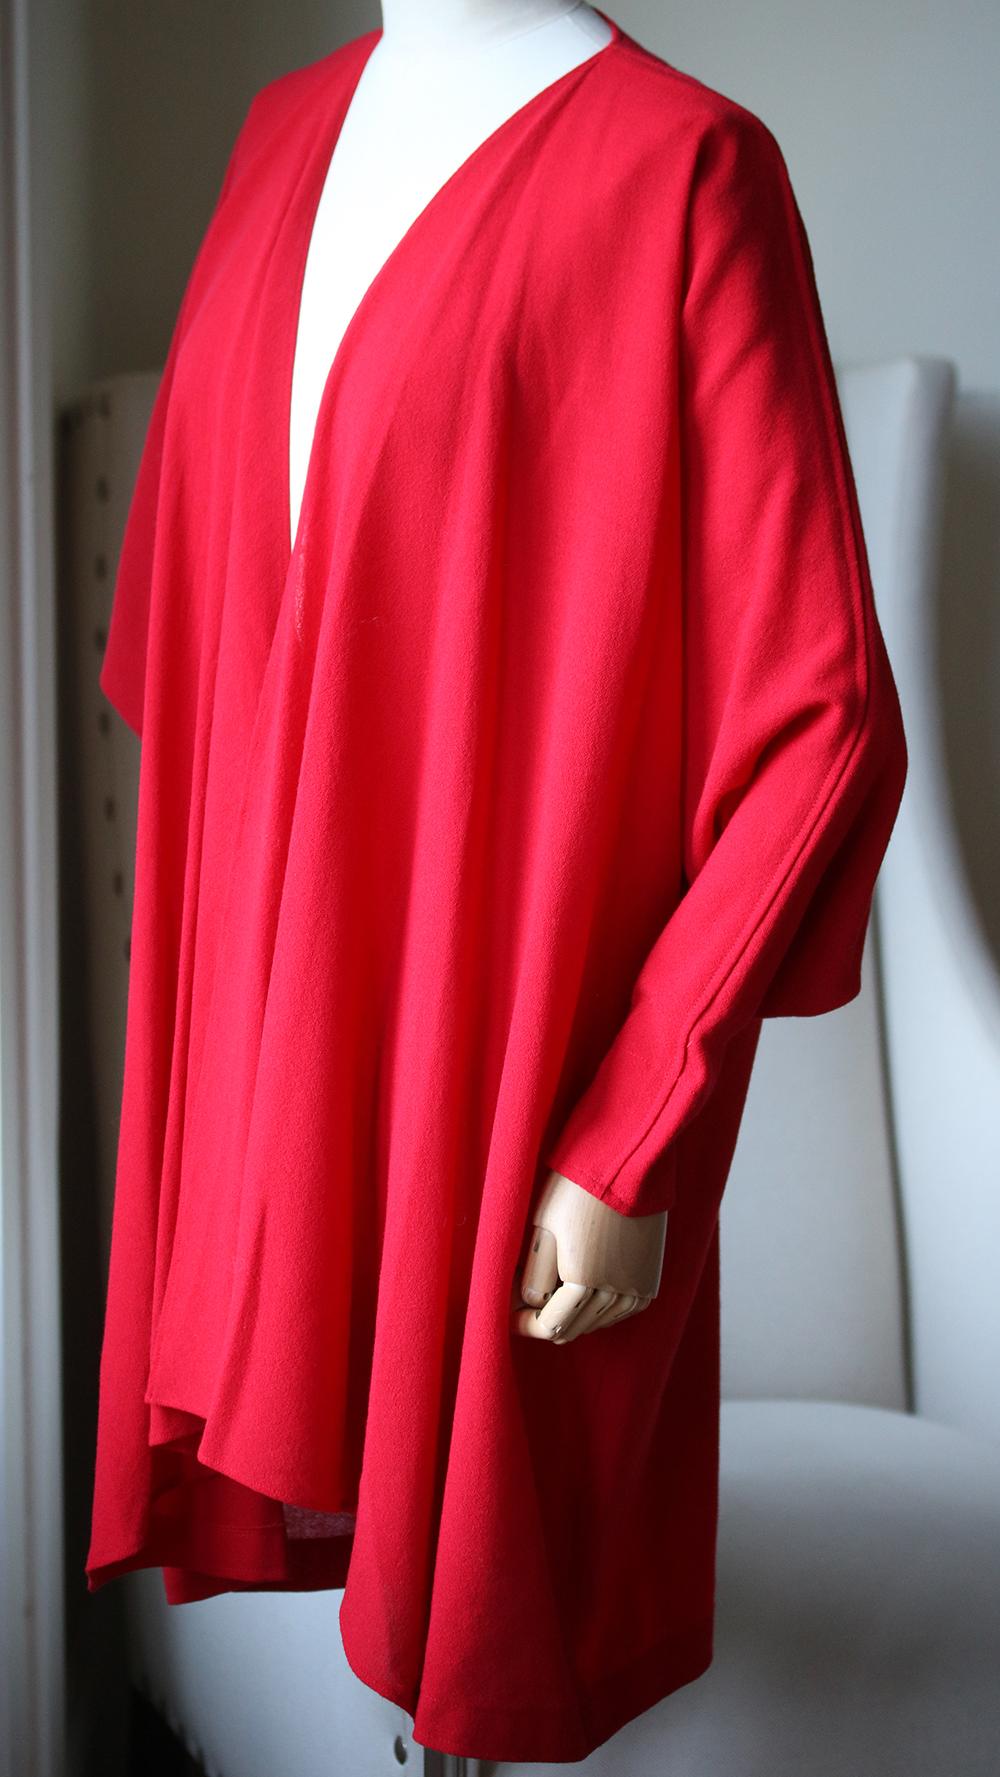 Lovely vintage piece from Jean Muir, an iconic, collectible designer. The finest crepe in bright red, with draping front detail, wide cuff, hanging to the hips. Simple tailoring that has stunning details. 100% Viscose.

Size: UK 10 (US 6, FR 38, IT